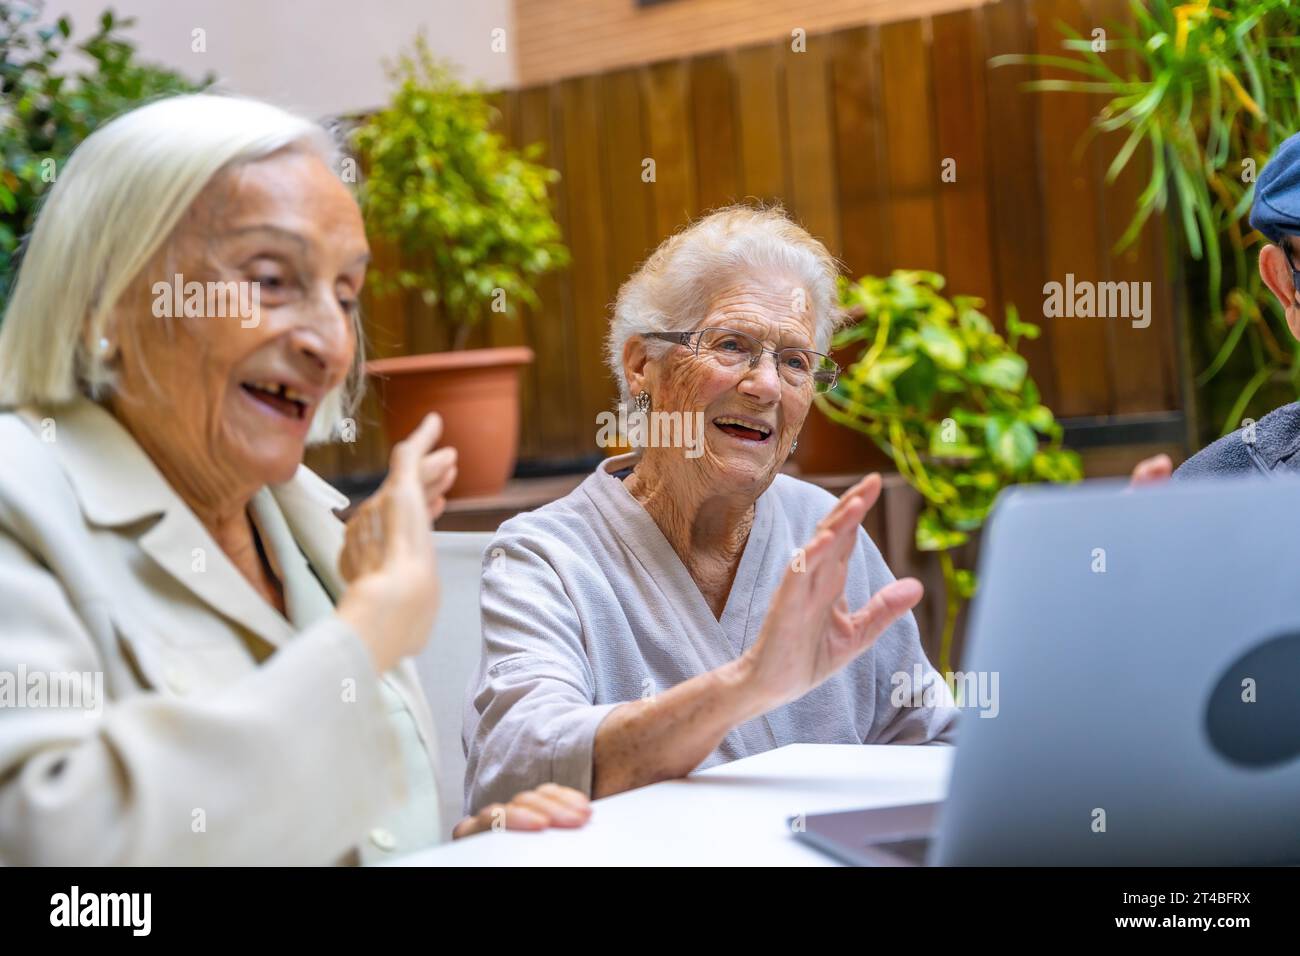 Happy women waving during a video call in a geriatric. Introducing technology to seniors Stock Photo